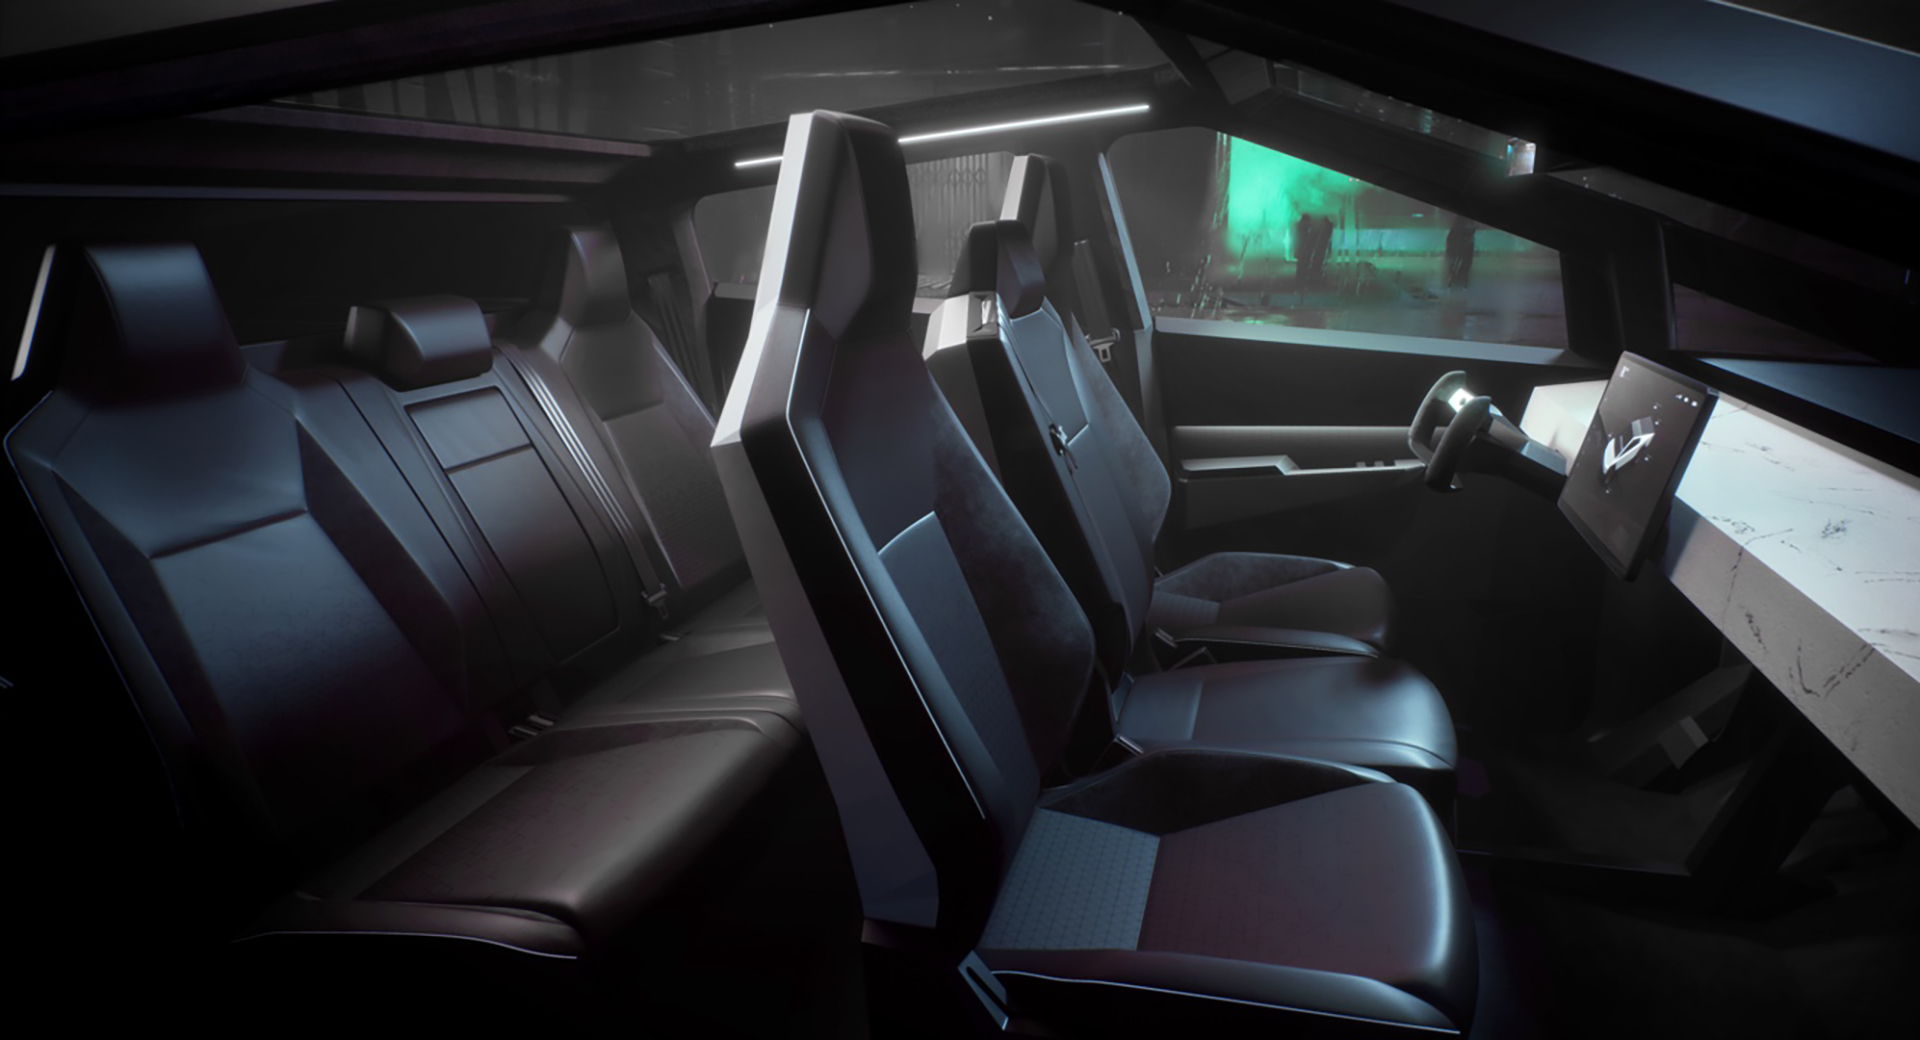 Tesla Cybertruck interior - Tesla Cybertruck interior comes with foldable rear seats